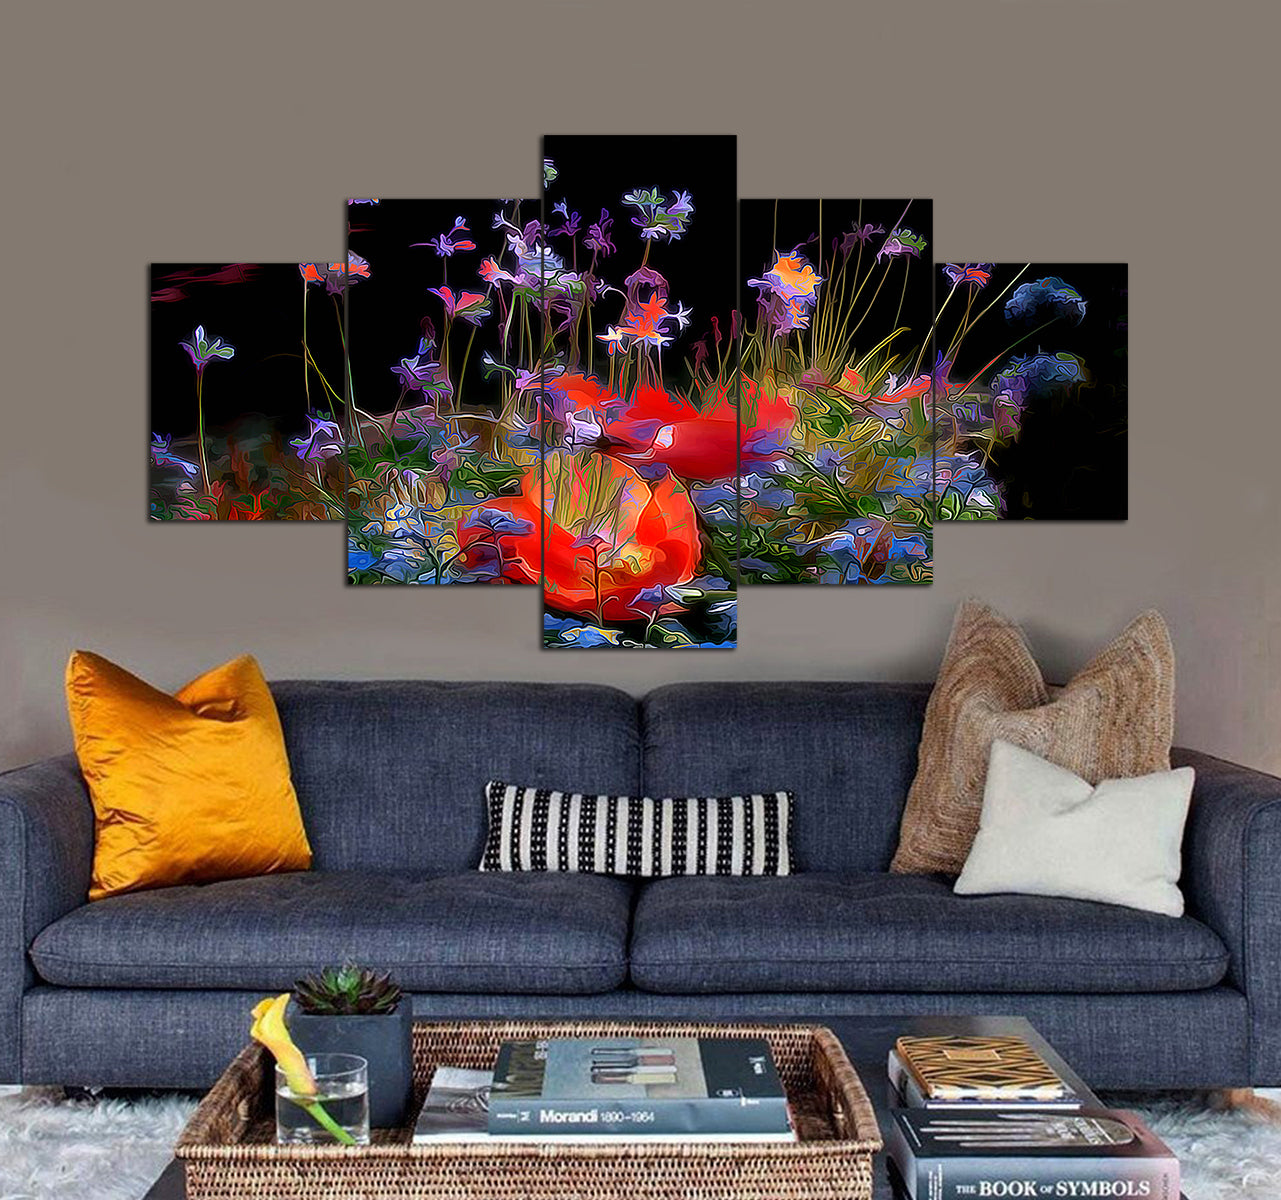 Abstract Flower 2 Painting 1 3D 5 Piece Canvas Art